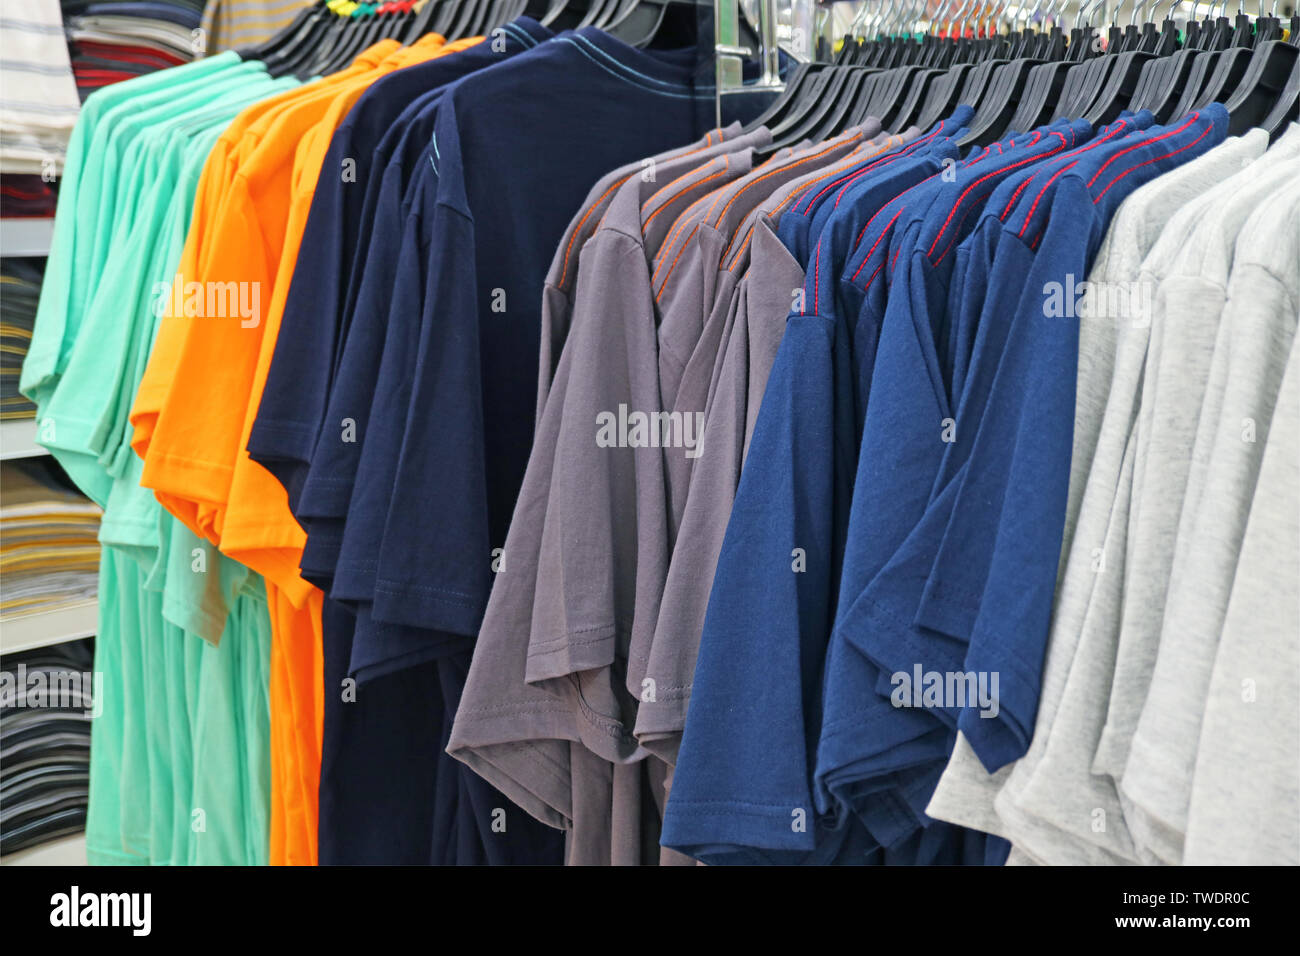 Row of Multi-color Men's T-shirts on Cloth Hangers in the Store Stock Photo